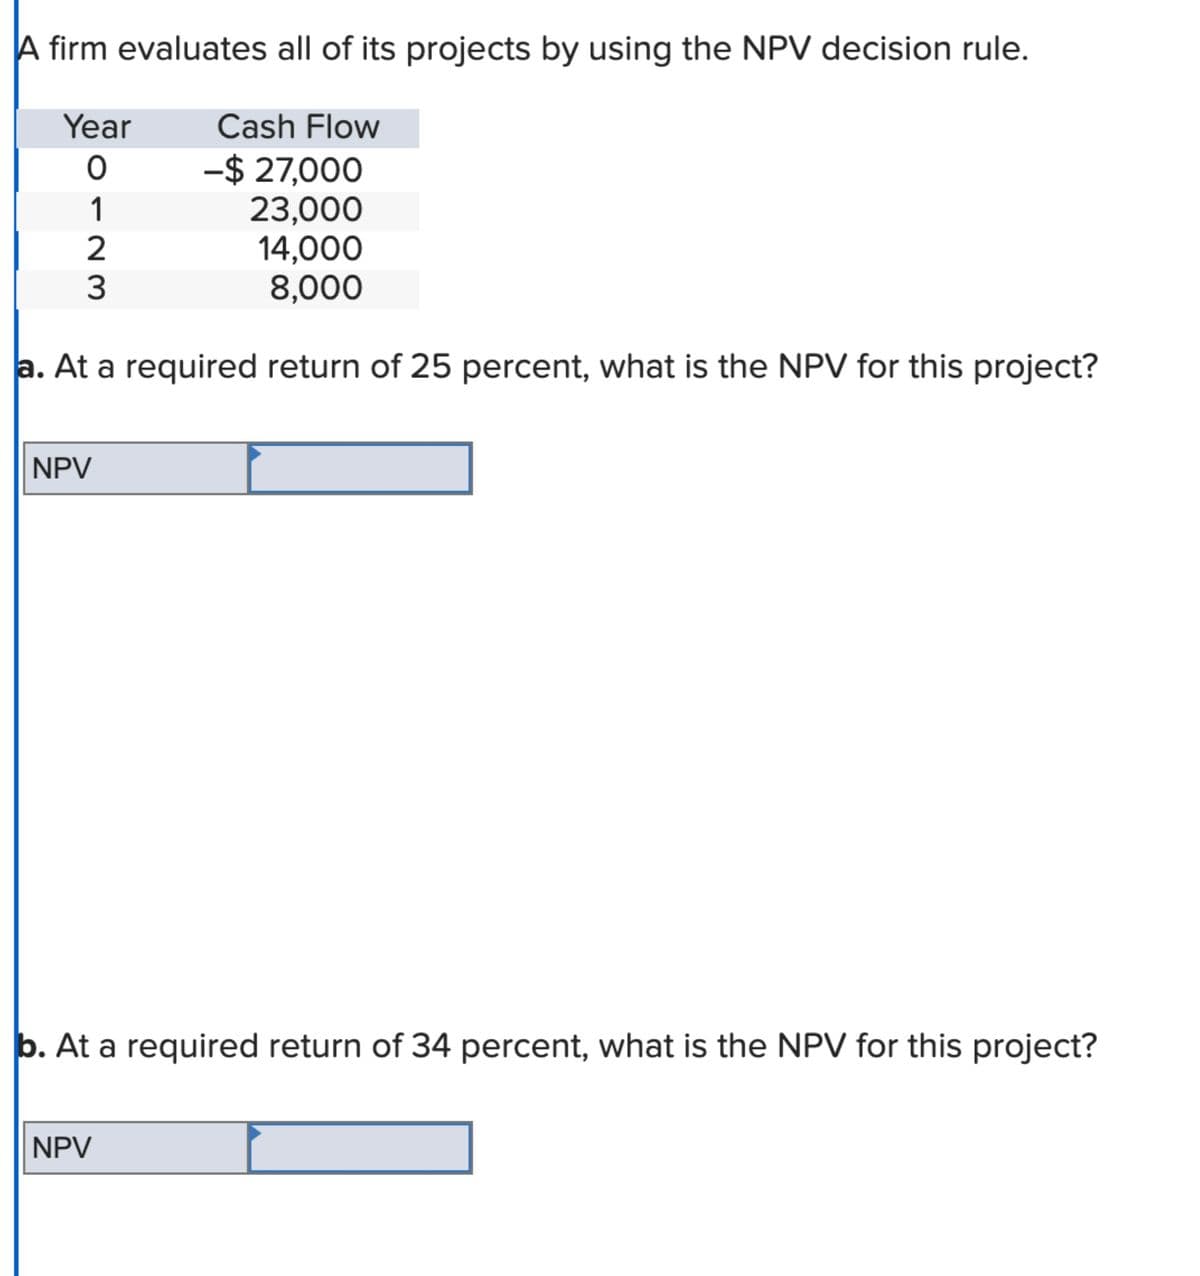 A firm evaluates all of its projects by using the NPV decision rule.
Year
Cash Flow
0
-$ 27,000
1
23,000
14,000
8,000
a. At a required return of 25 percent, what is the NPV for this project?
2
WN
3
NPV
b. At a required return of 34 percent, what is the NPV for this project?
NPV